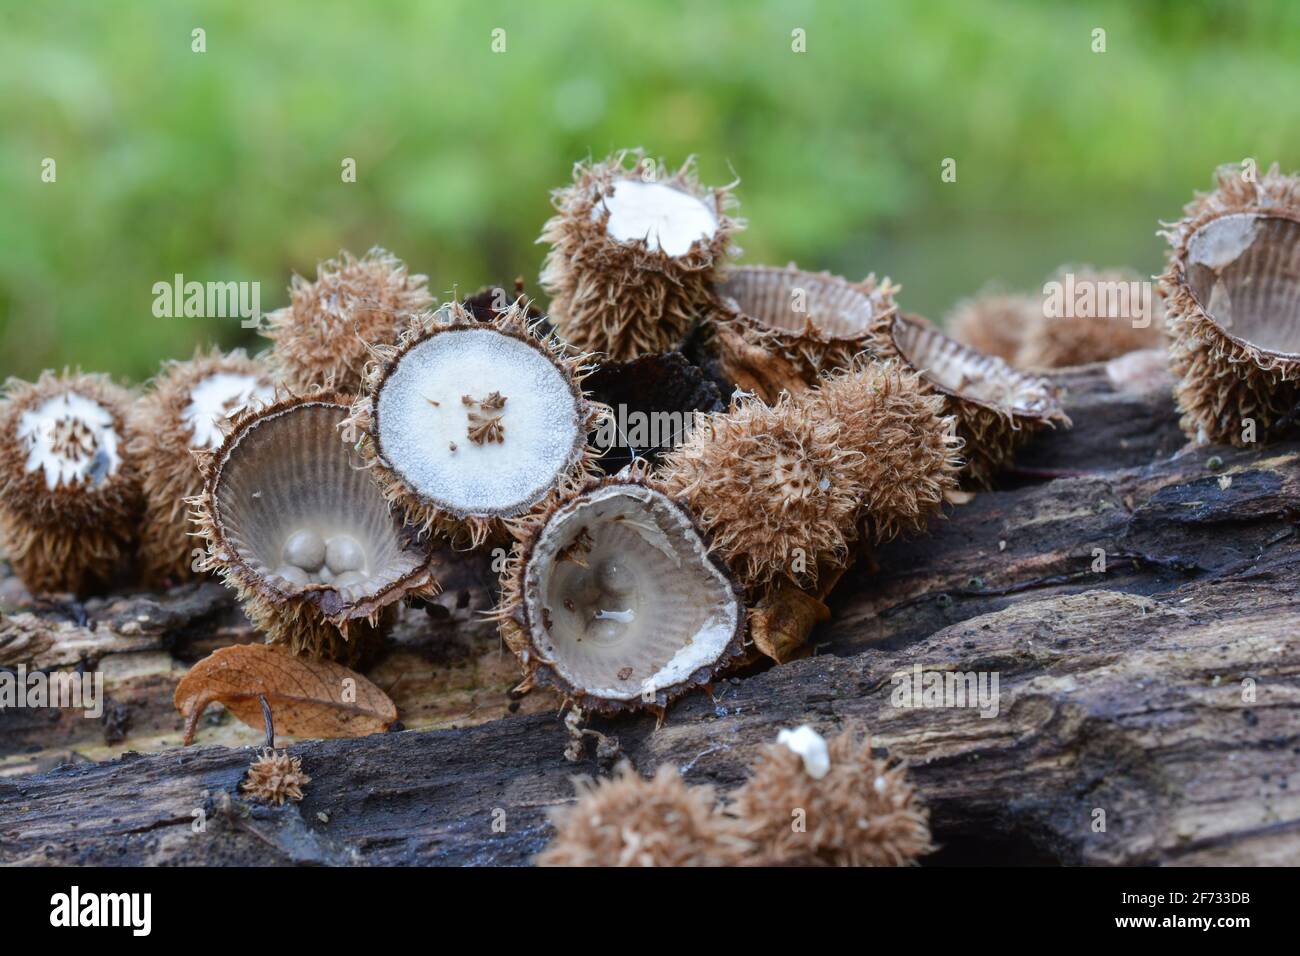 Cyathus striatus or bird's nest mushrooms in different stages of development in natural habitat, on rotting wood besides mountain creek, against green Stock Photo